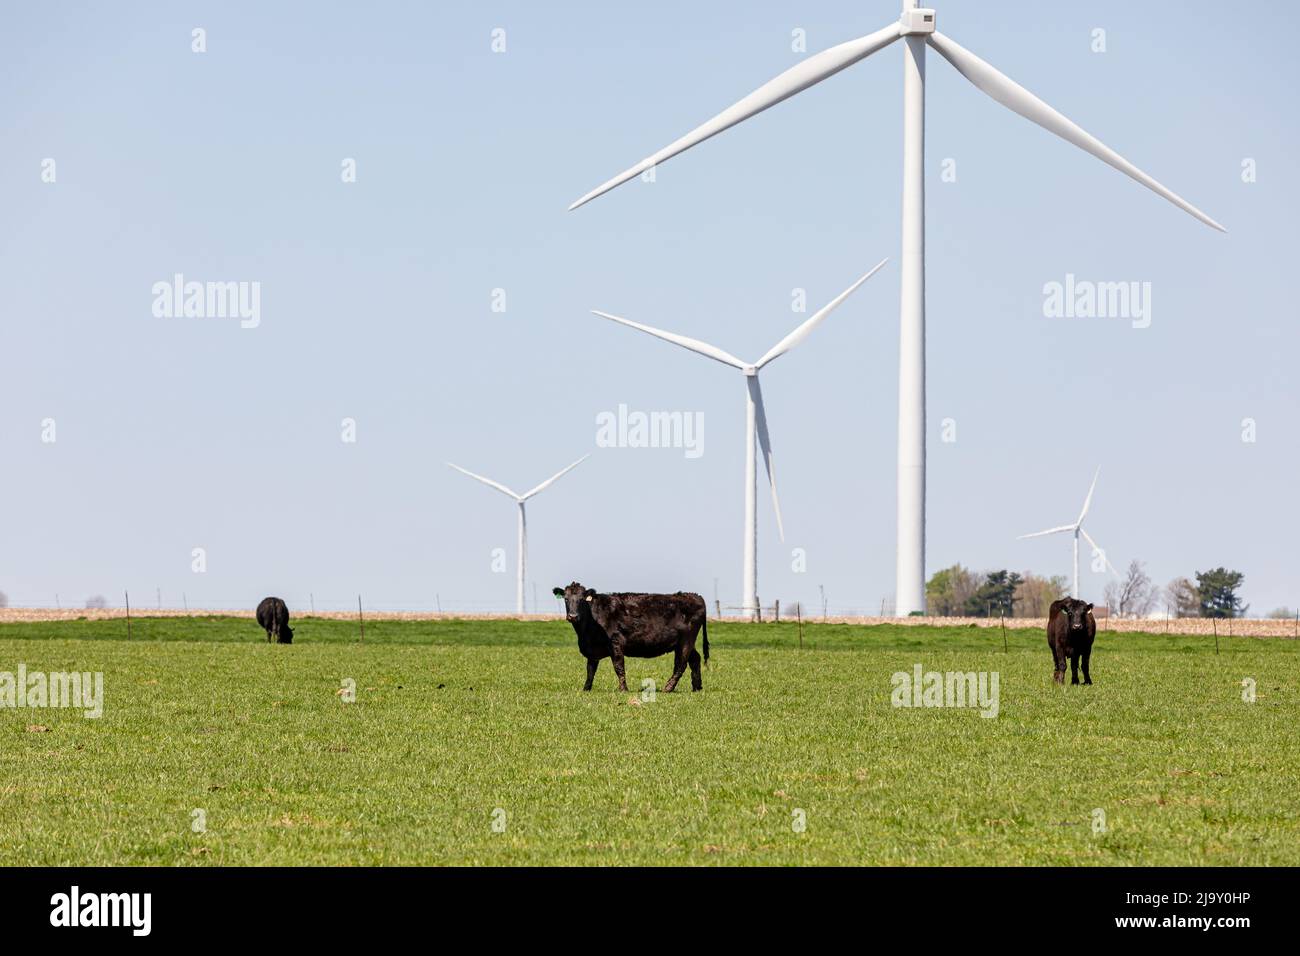 Cows grazing in green pasture with wind farm turbines in background. Agriculture, renewable clean energy and methane greenhouse gas concept. Stock Photo